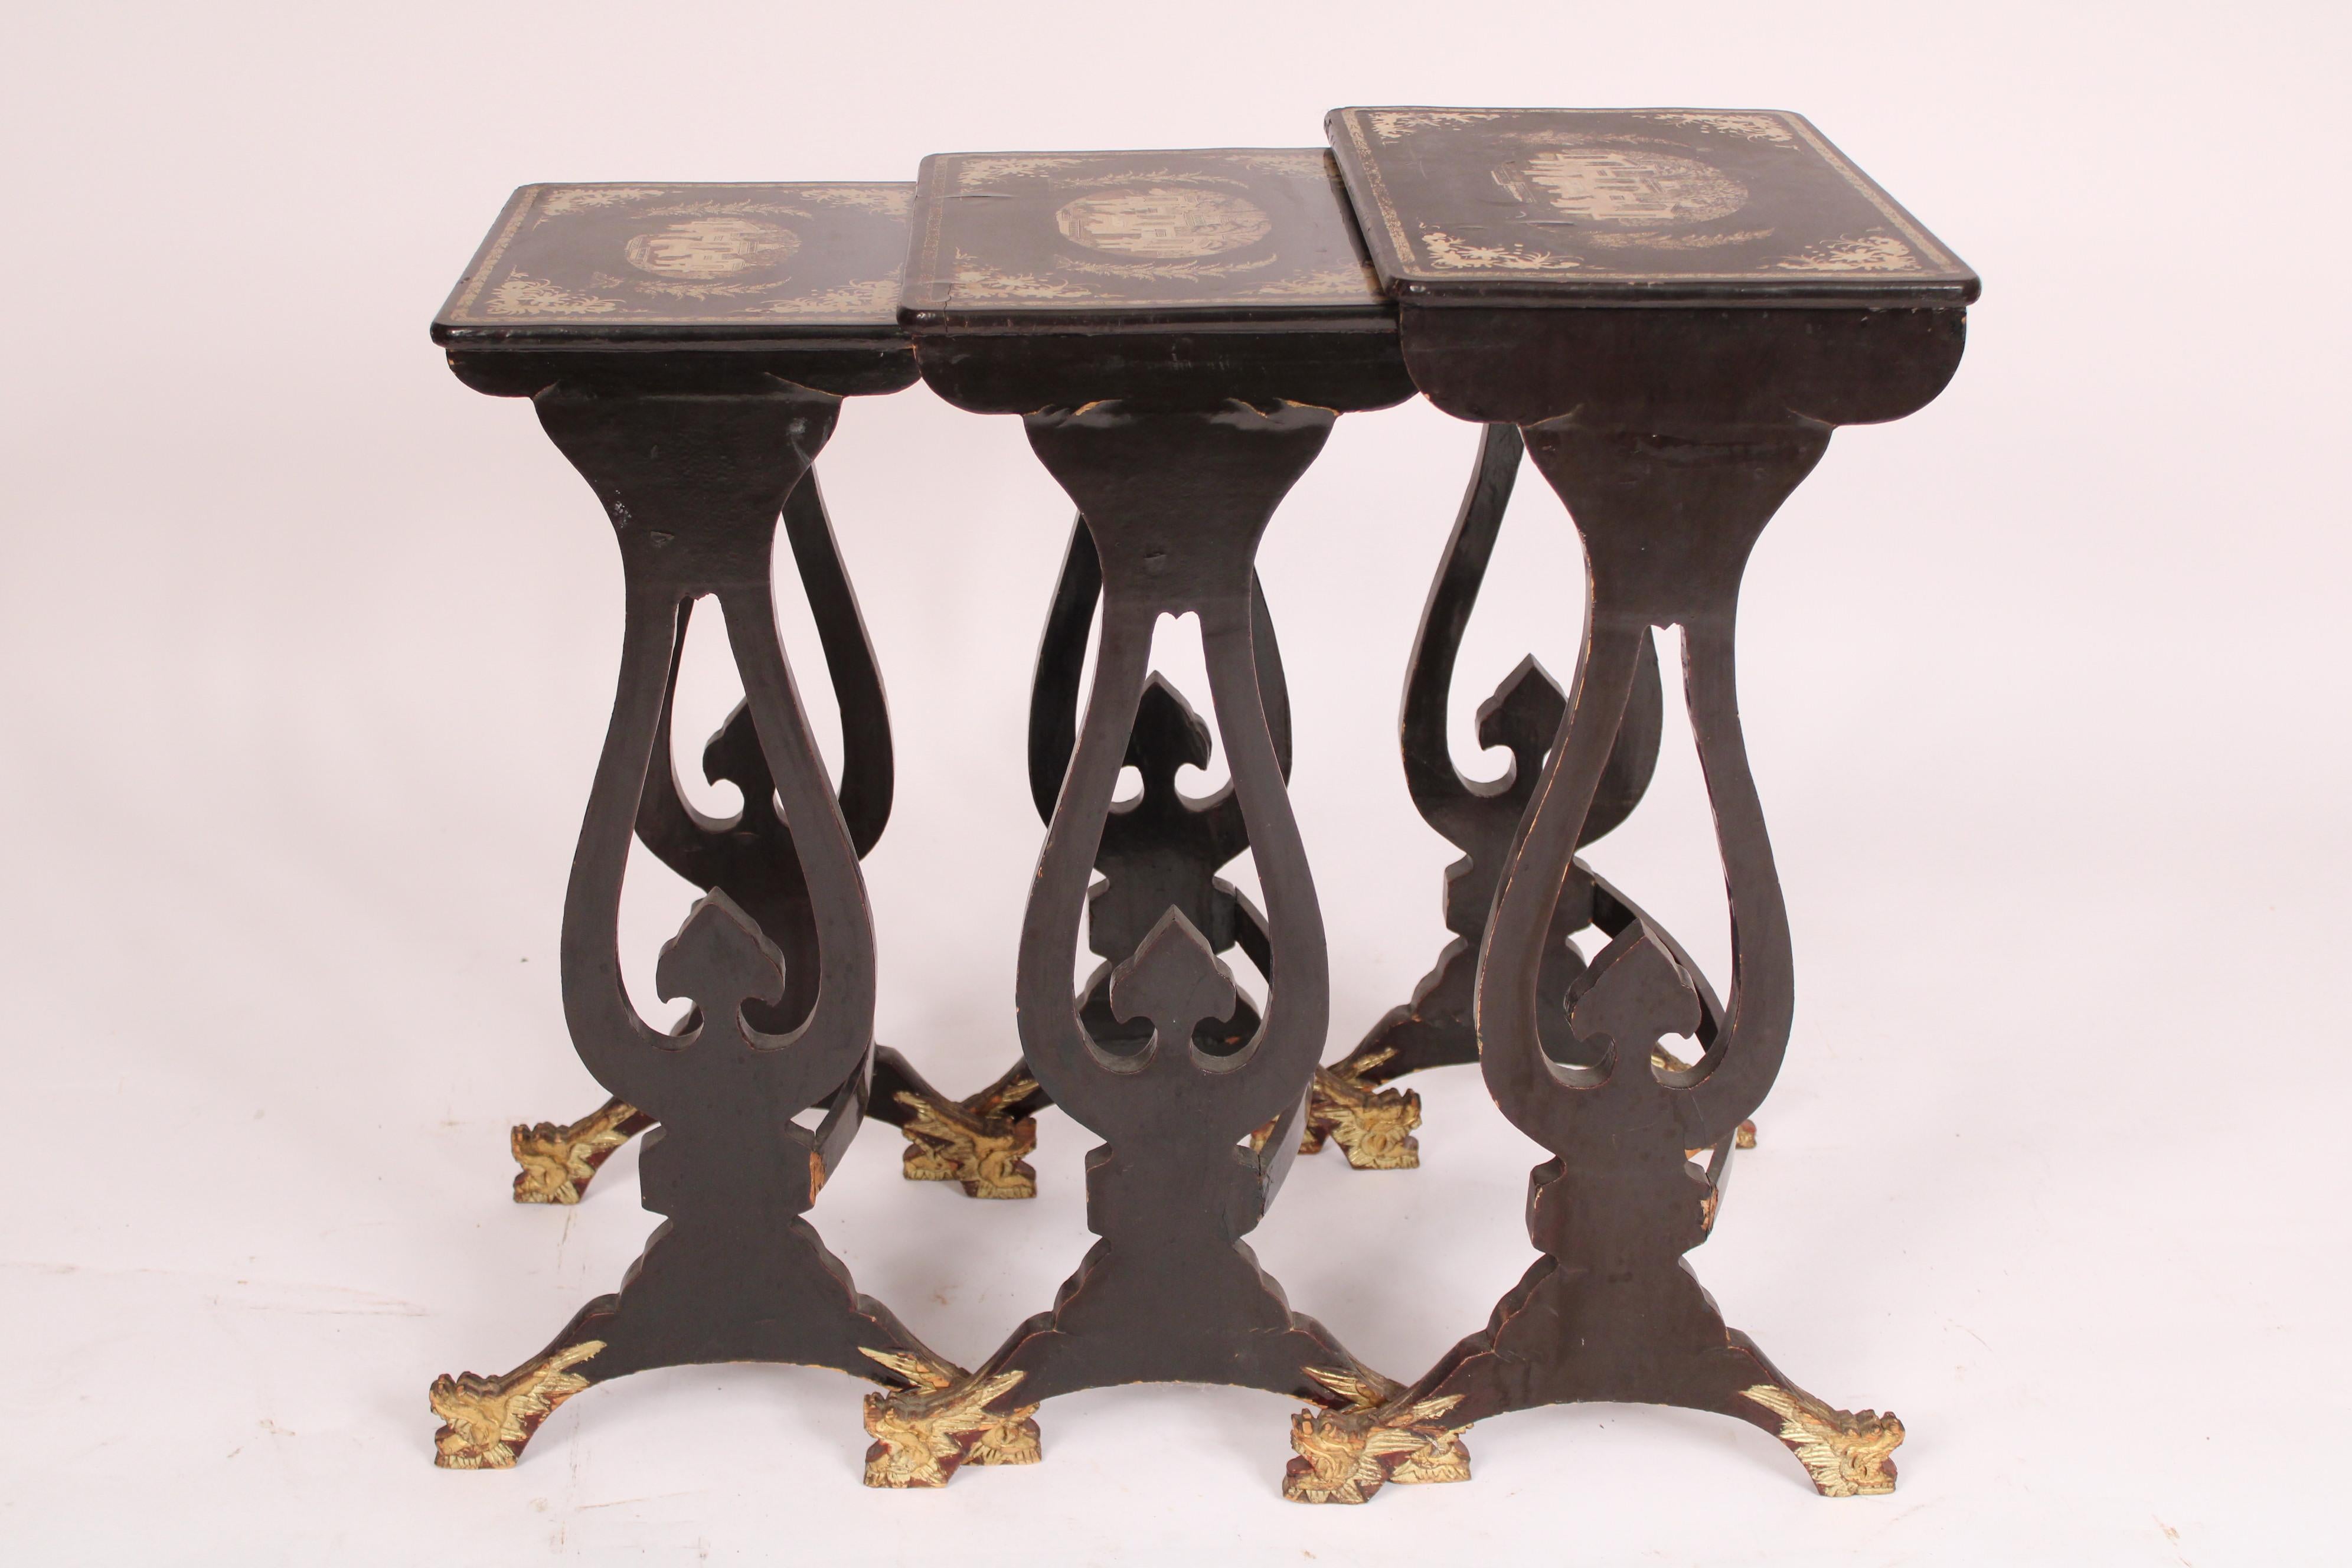 Chinese Export Black Lacquer and Gilt Decorated Nest of tables In Good Condition For Sale In Laguna Beach, CA